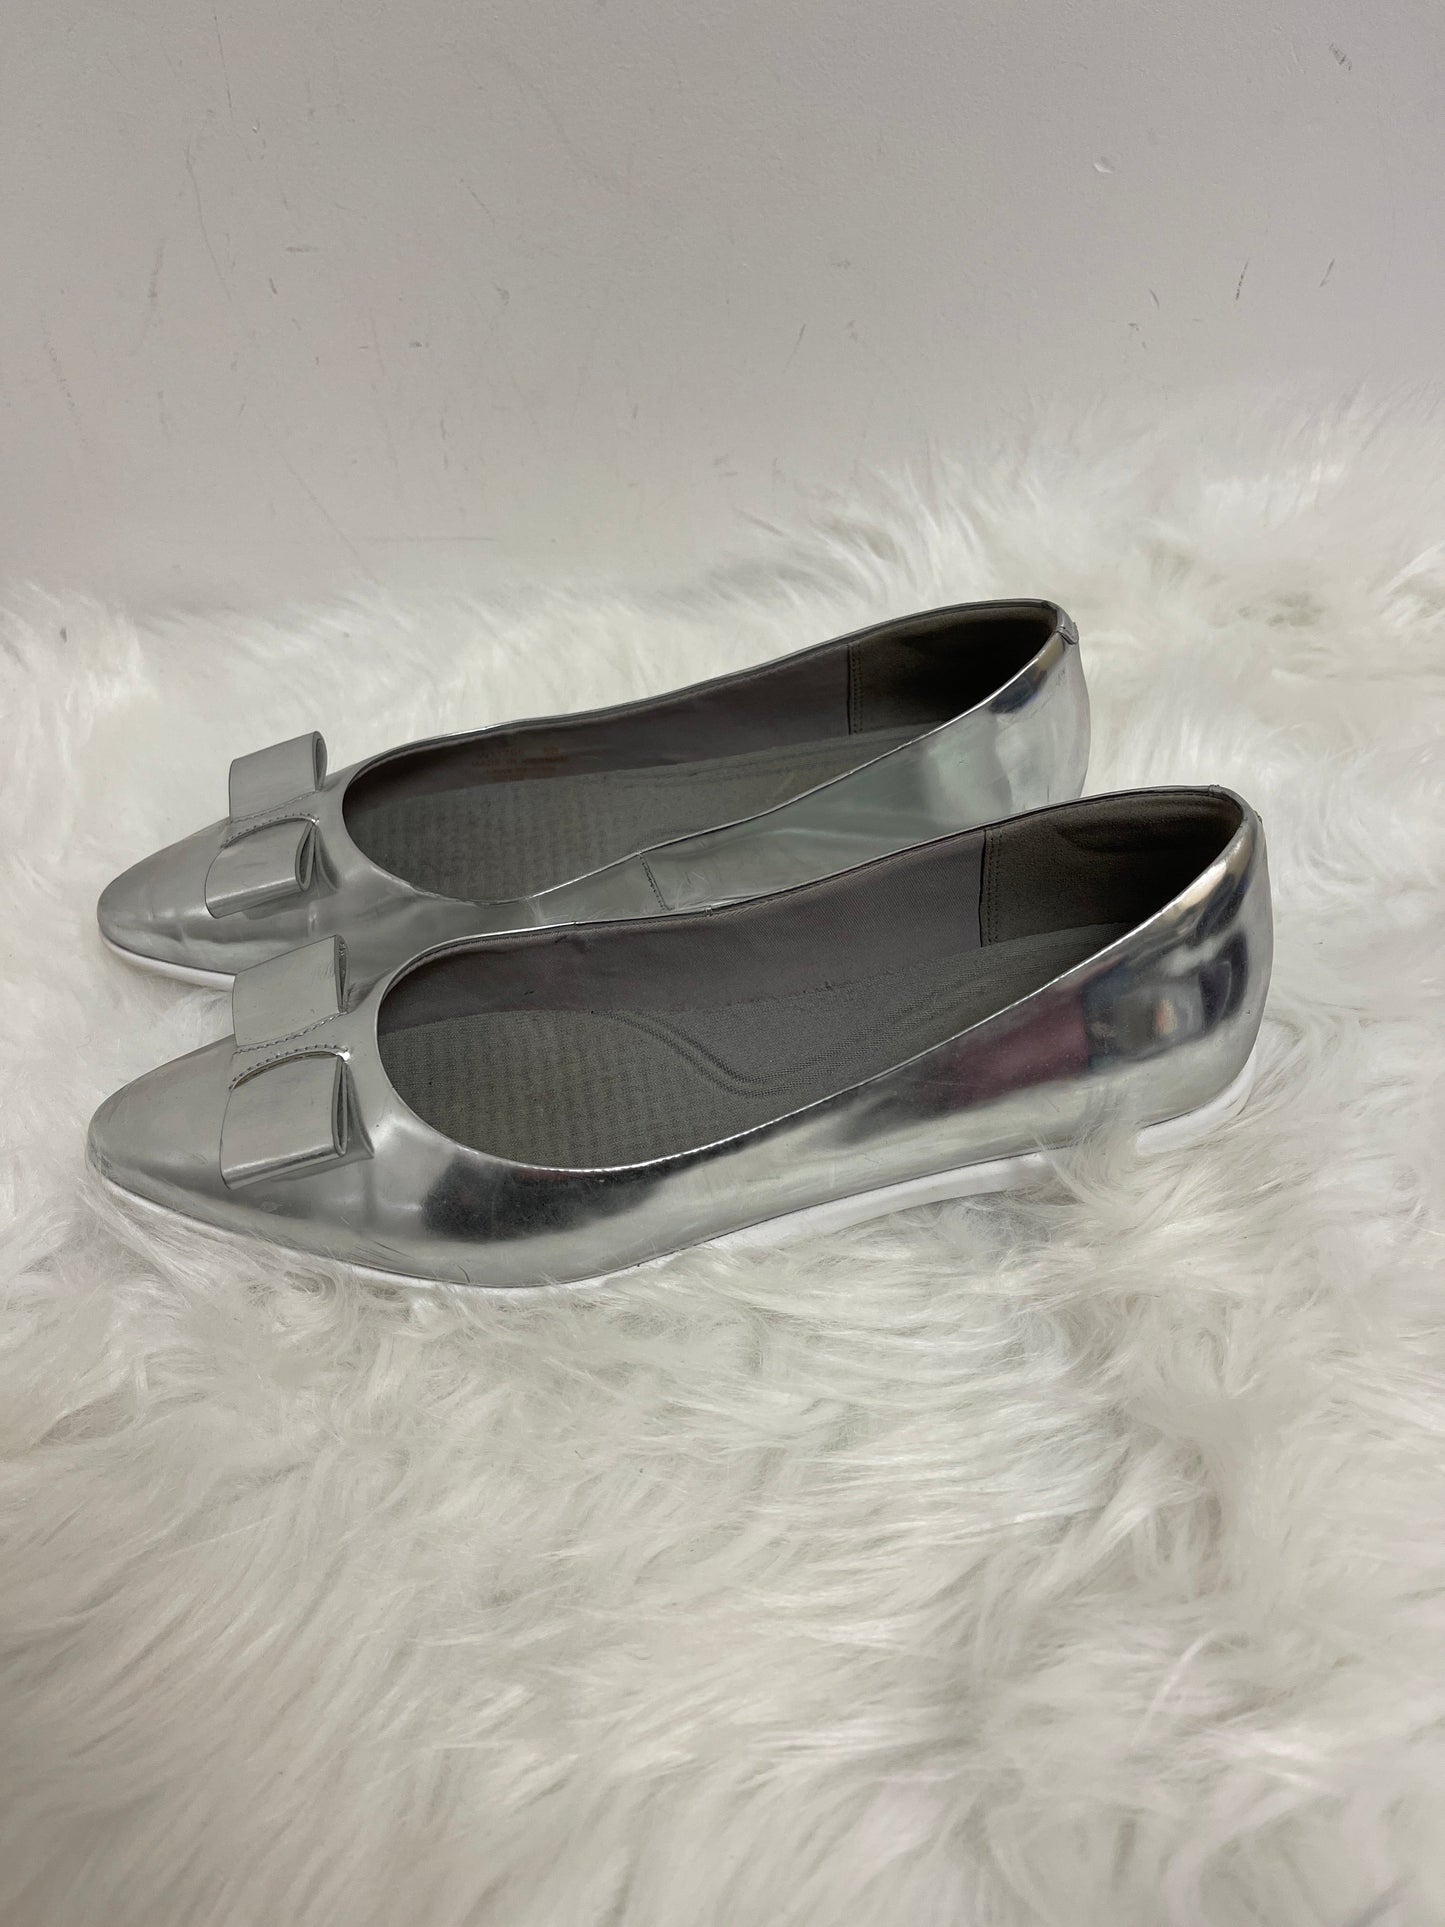 Silver Shoes Flats Cole-haan, Size 8